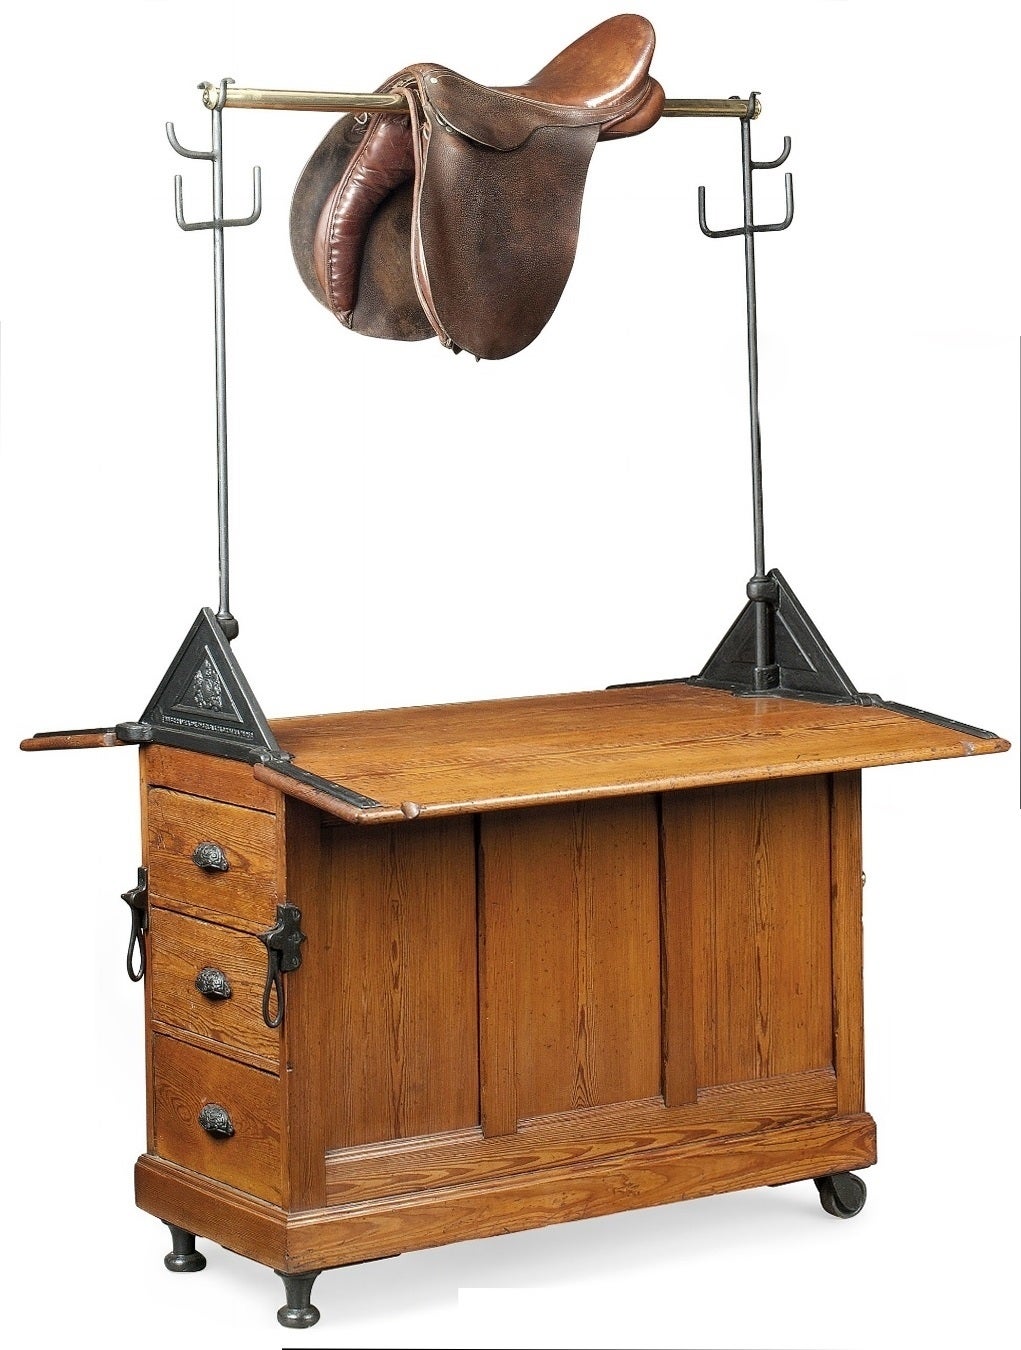 Late C19th Pitch Pine Saddle Horse, by Musgrave & Co Ltd